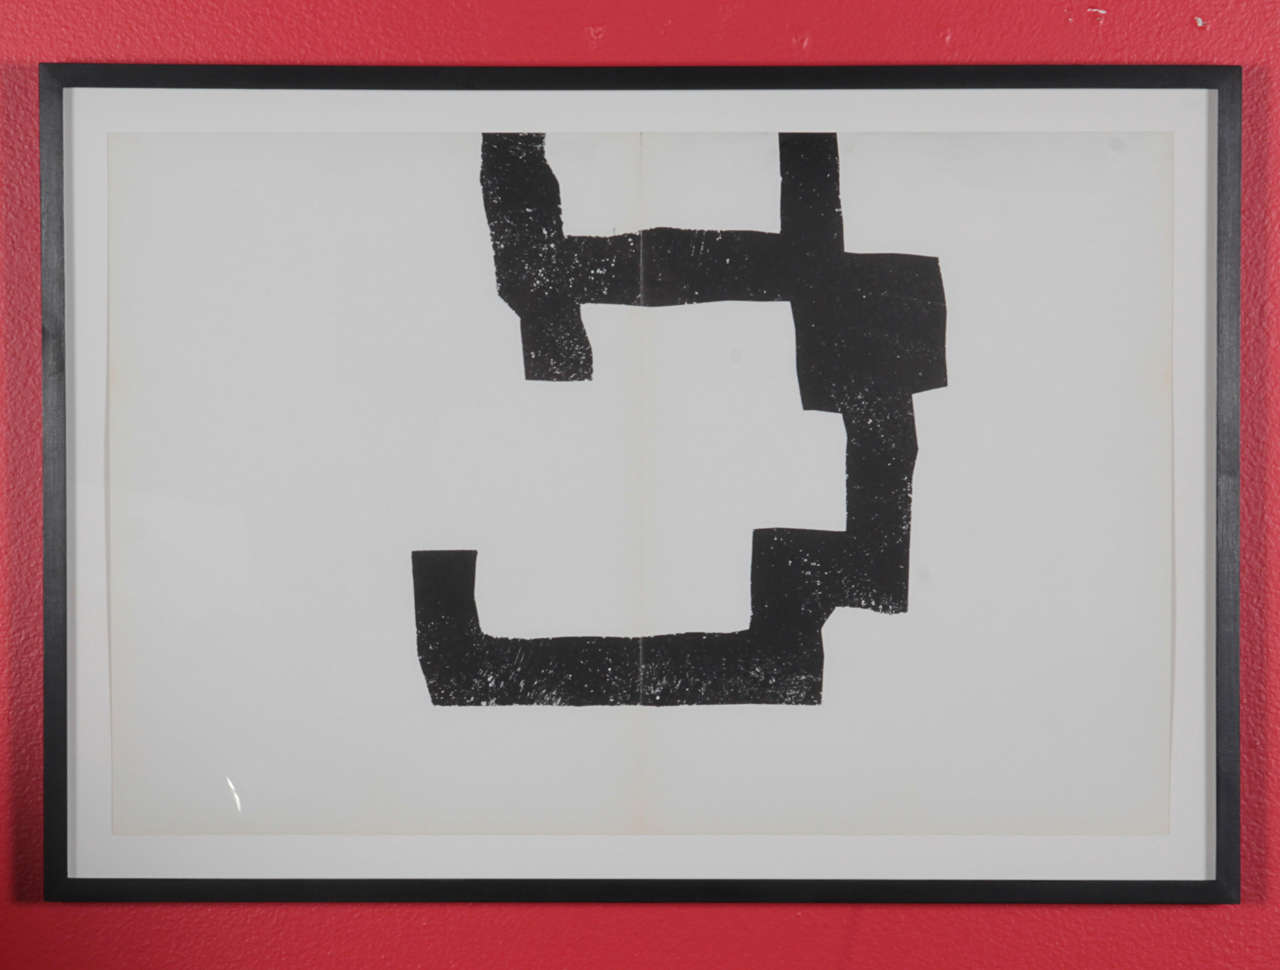 Eduardo Chillida (Spanish, 1924-2002). “Composition #04″. Original woodcut. c1960. White wove paper. Printed to the edge of the sheet, top. Fine impression. Good condition; slight light-staining; centerfold as issued; affixed to very thin